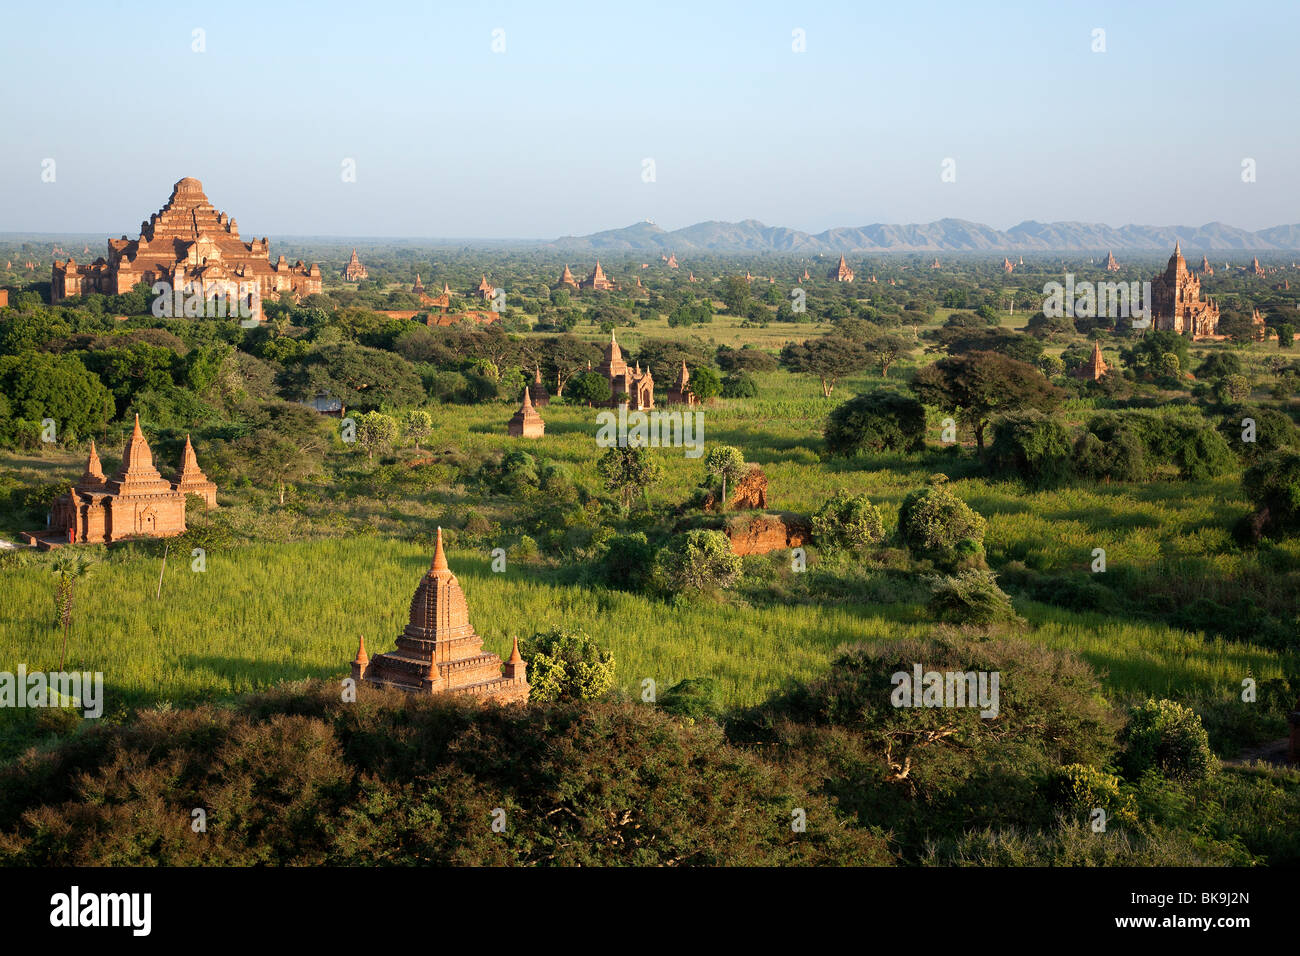 Bagan temples. On the background the Dhammayangyi temple. Myanmar Stock Photo